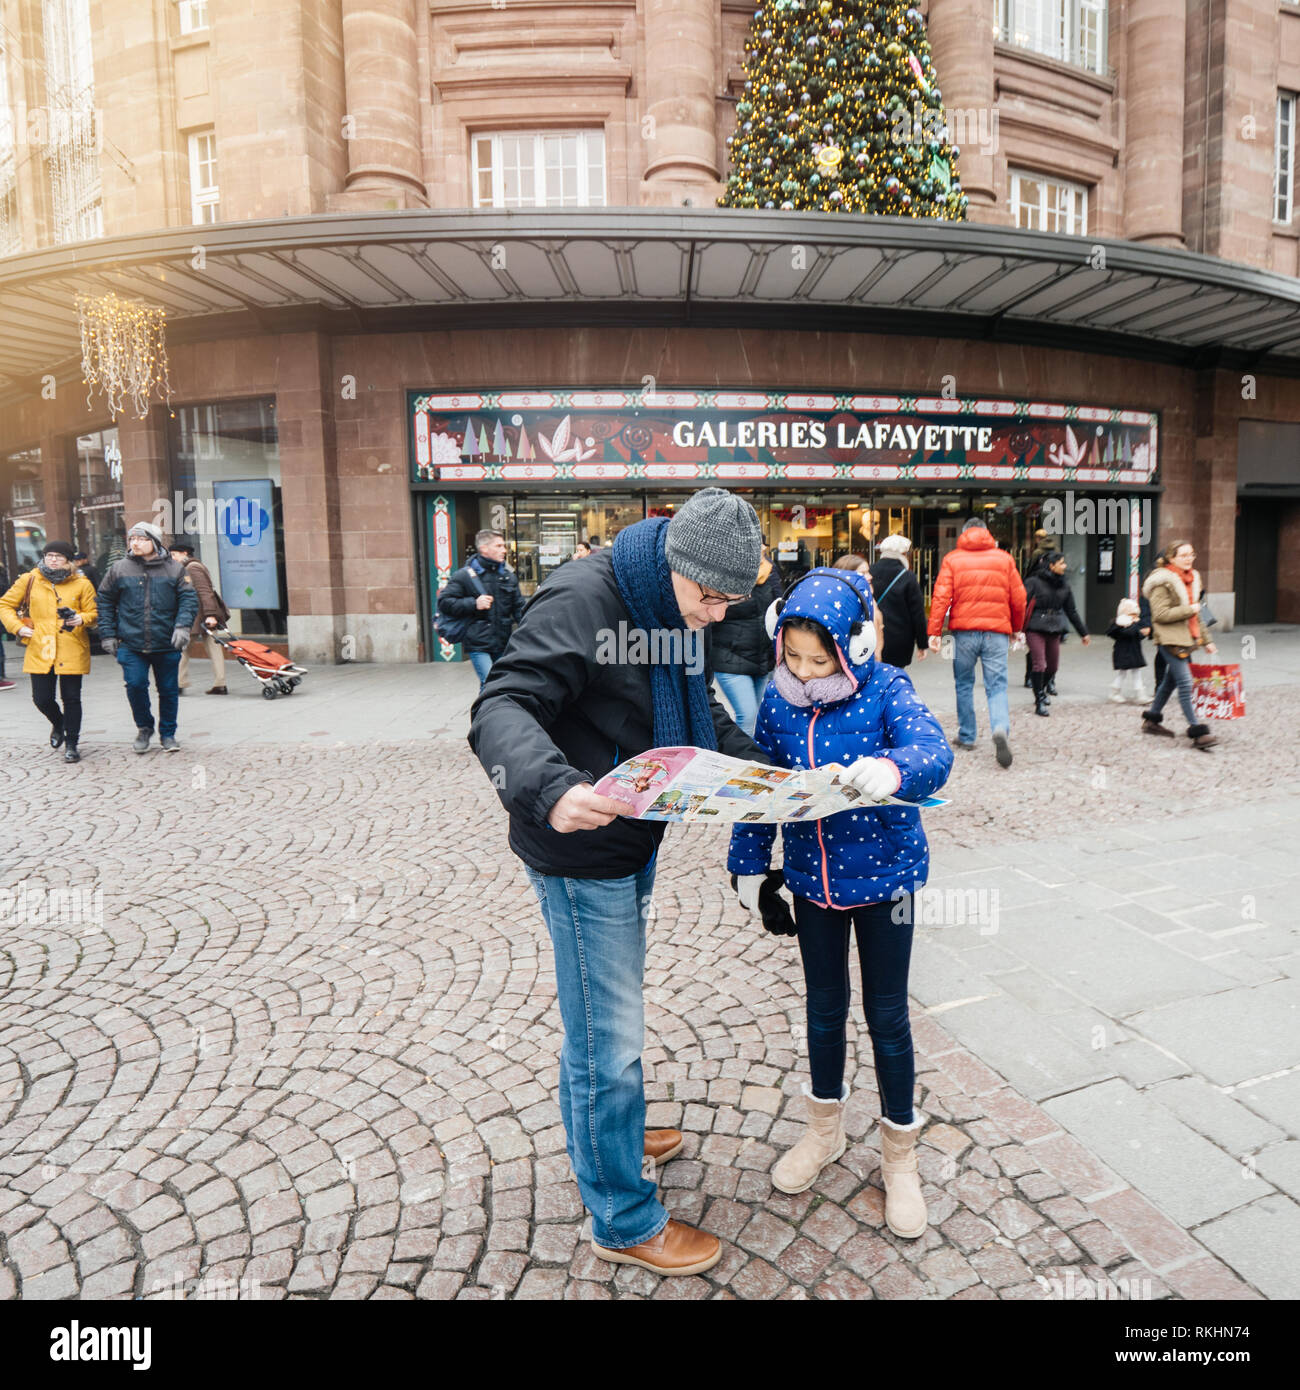 Strasbourg, France - Dec 29, 2018: Tourists, father and daughter